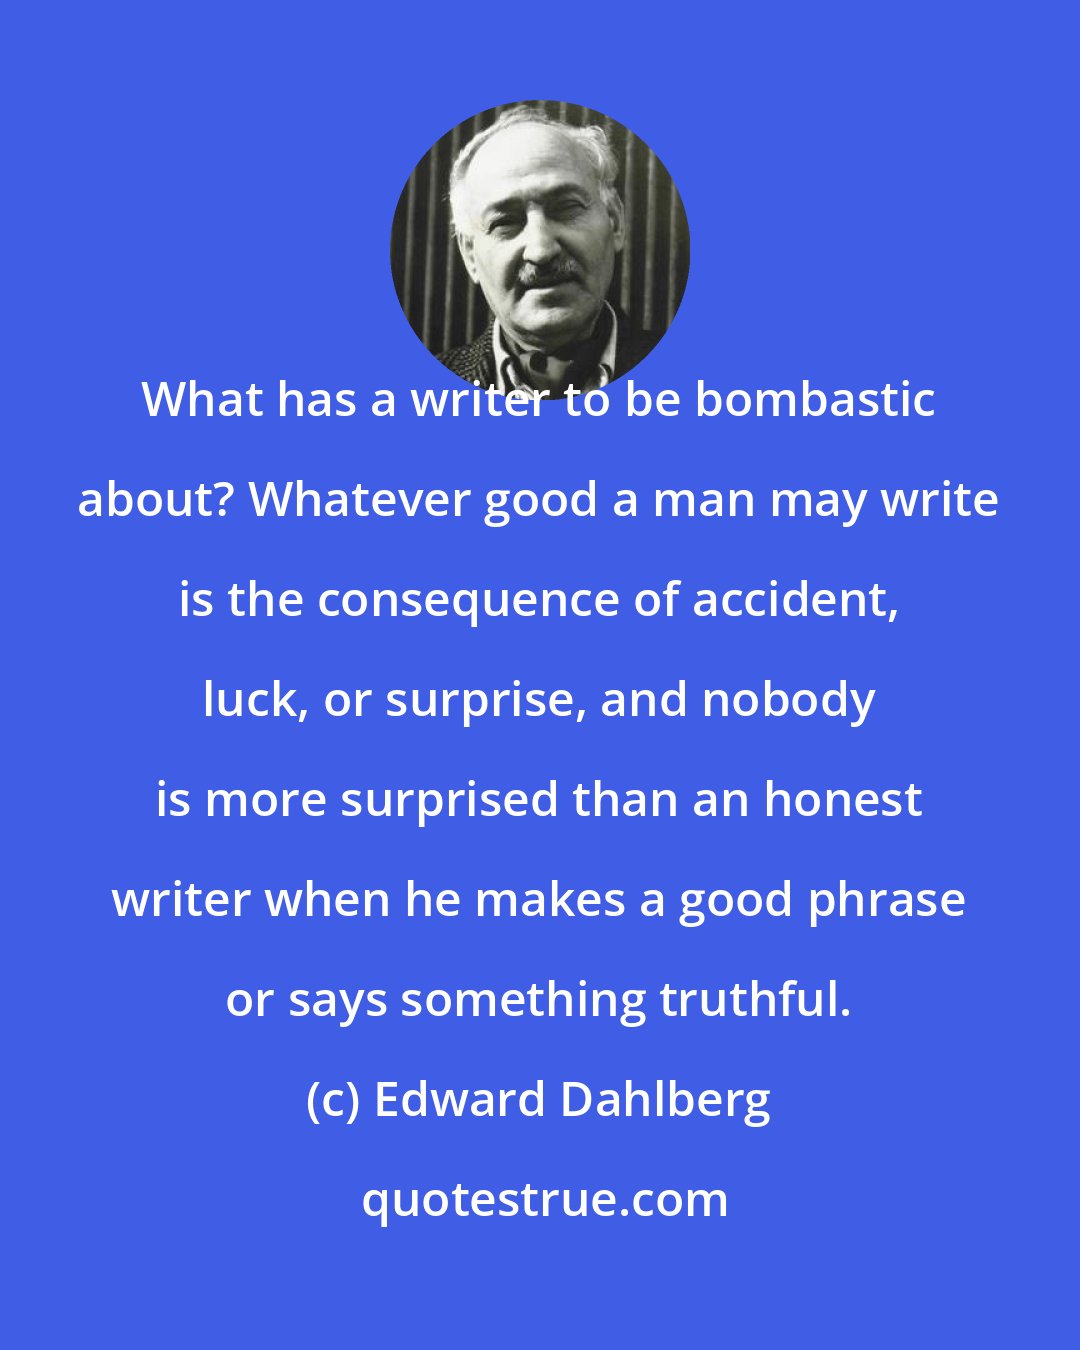 Edward Dahlberg: What has a writer to be bombastic about? Whatever good a man may write is the consequence of accident, luck, or surprise, and nobody is more surprised than an honest writer when he makes a good phrase or says something truthful.